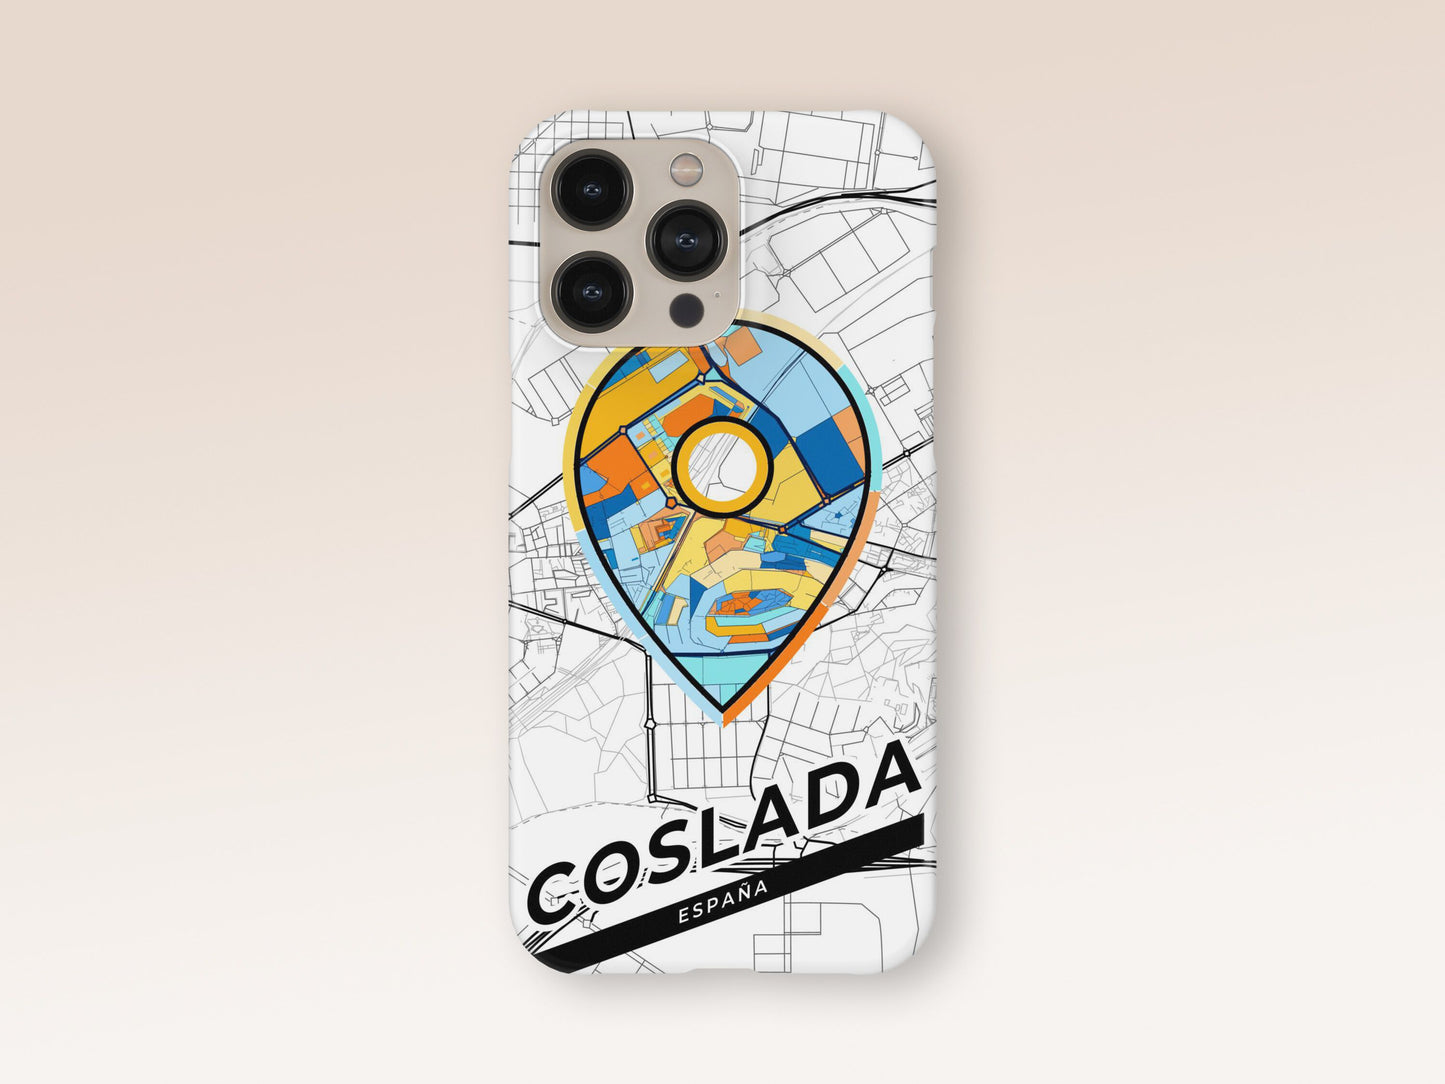 Coslada Spain slim phone case with colorful icon. Birthday, wedding or housewarming gift. Couple match cases. 1